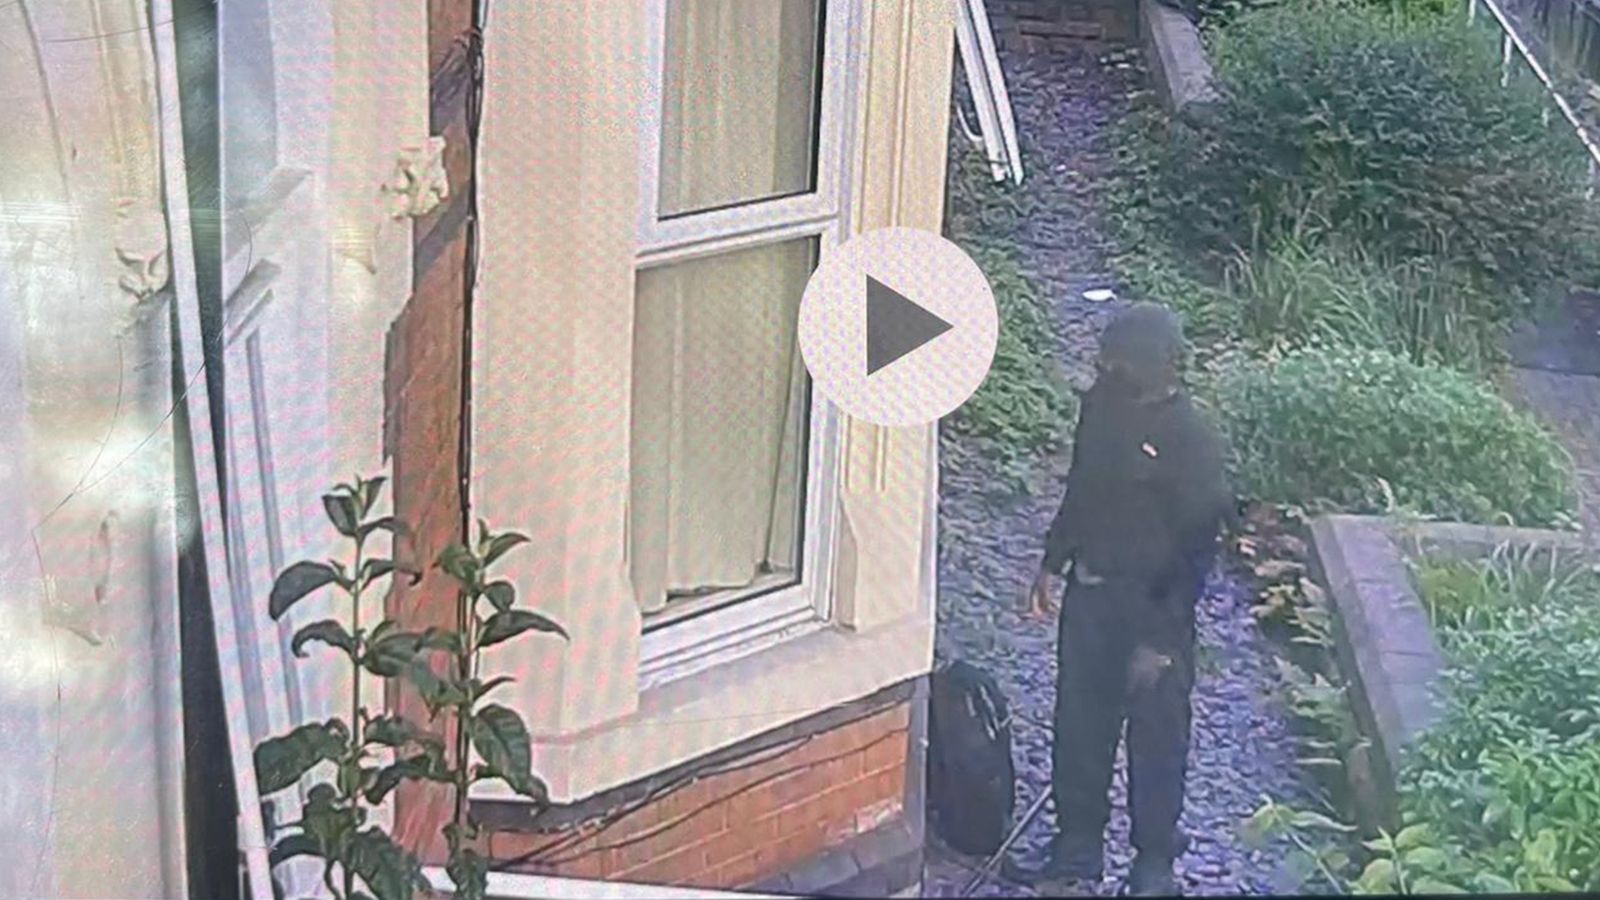 Nottingham attacks: Man believed to be suspect in killings tried to break into residential home